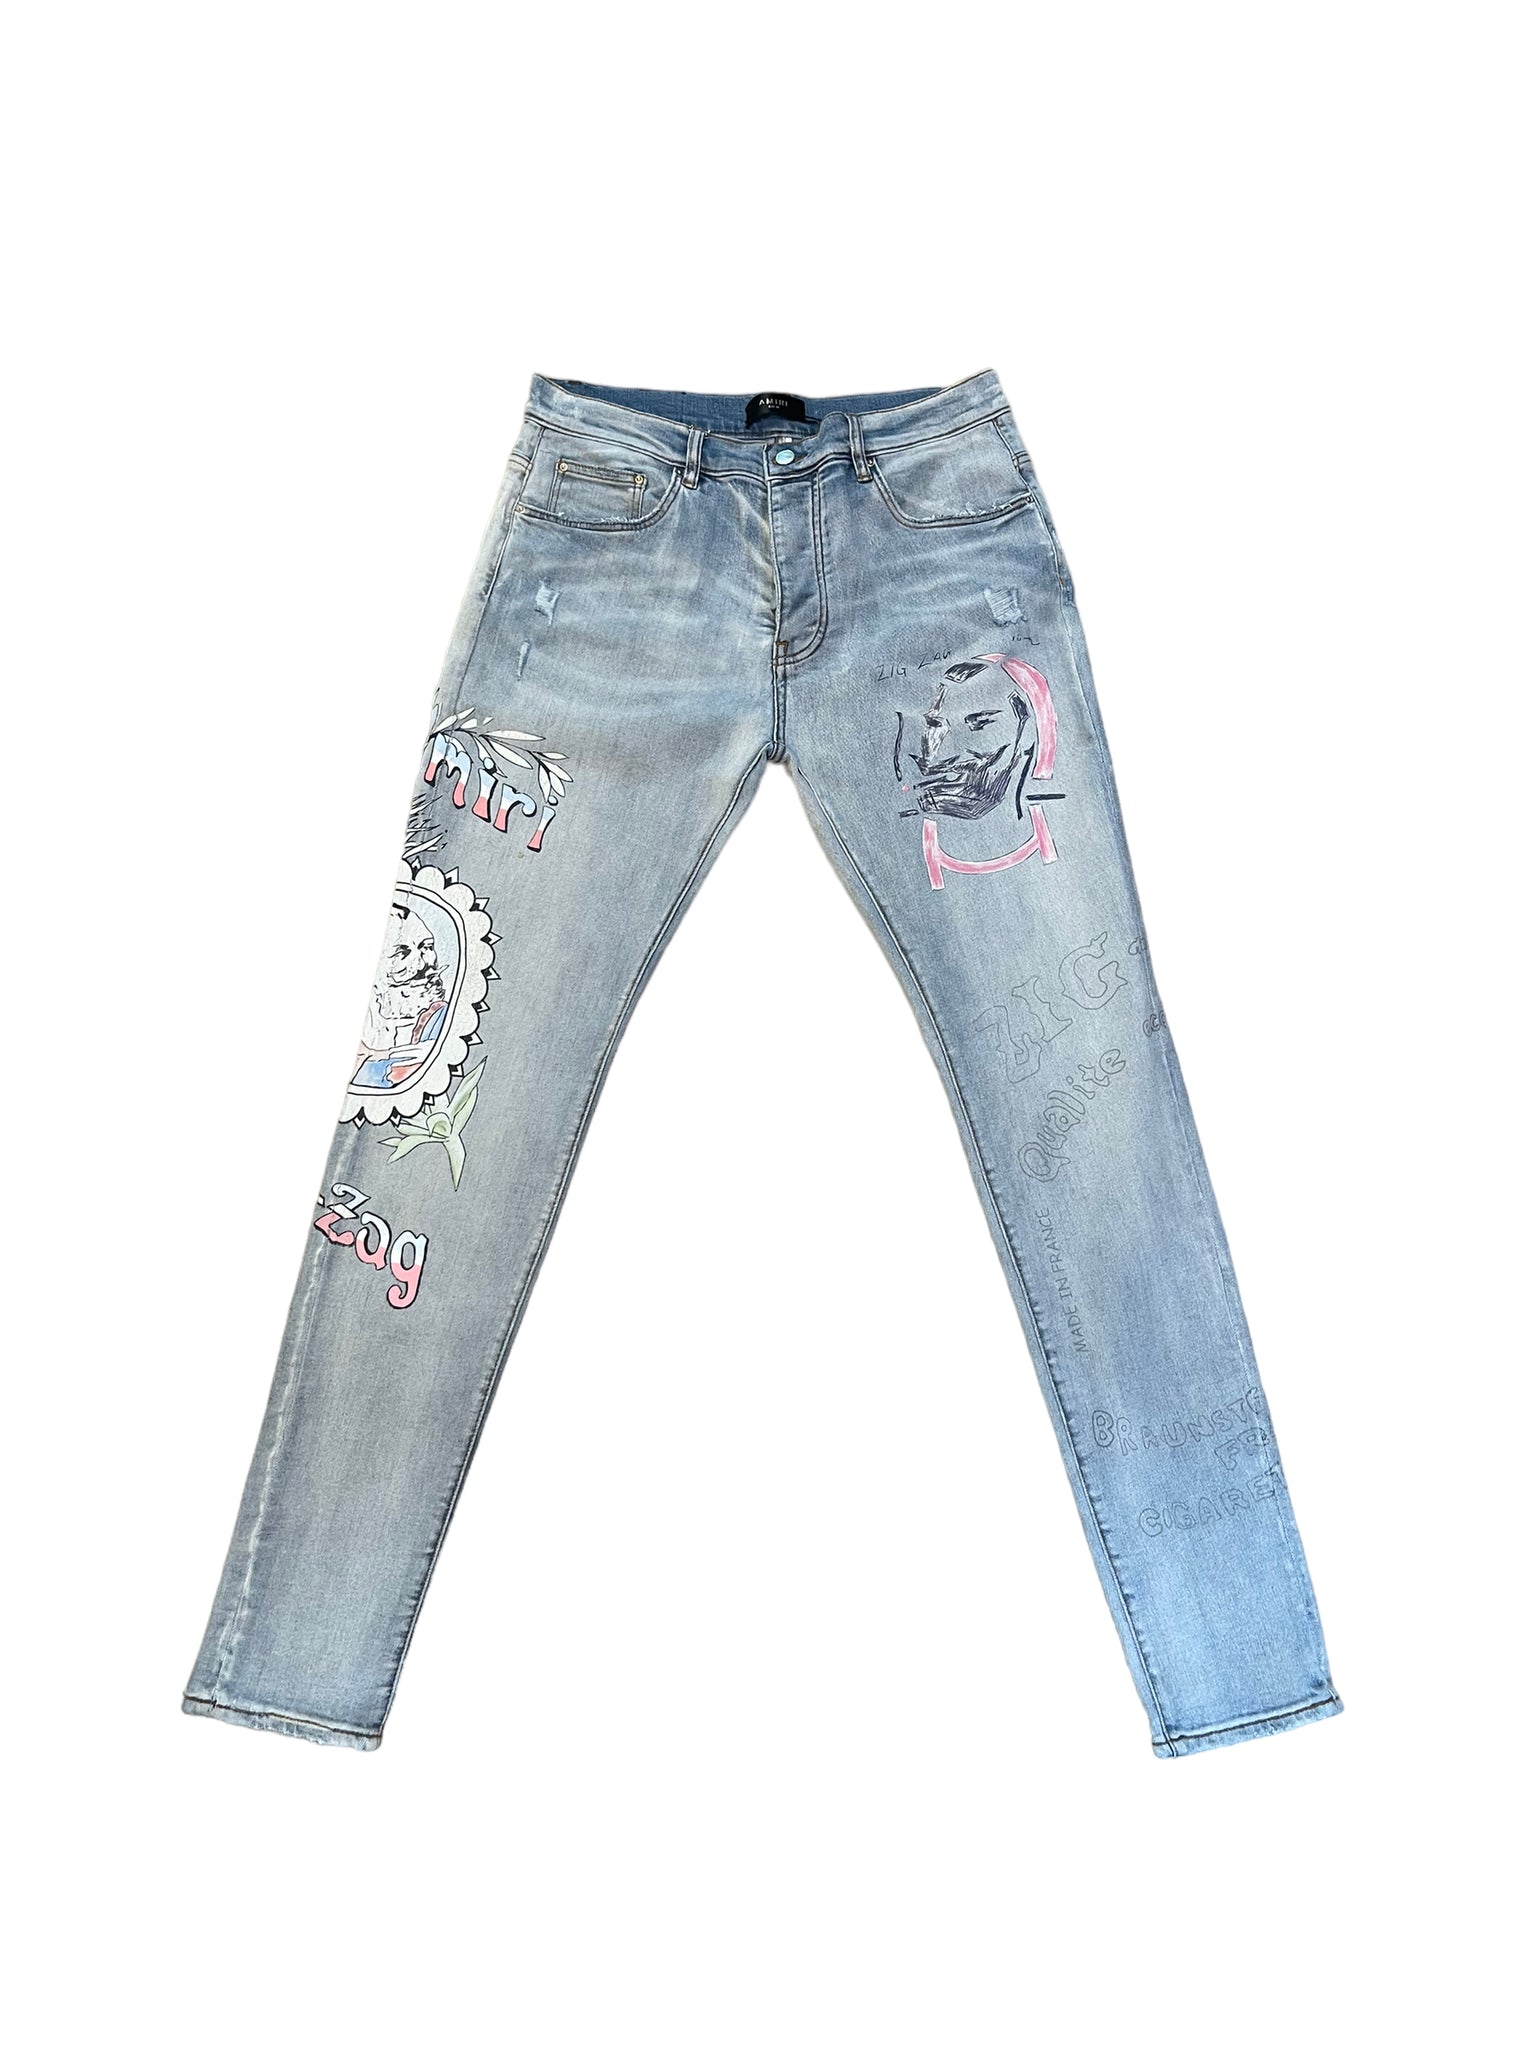 Amiri Stenciled Jeans "Light Washed"